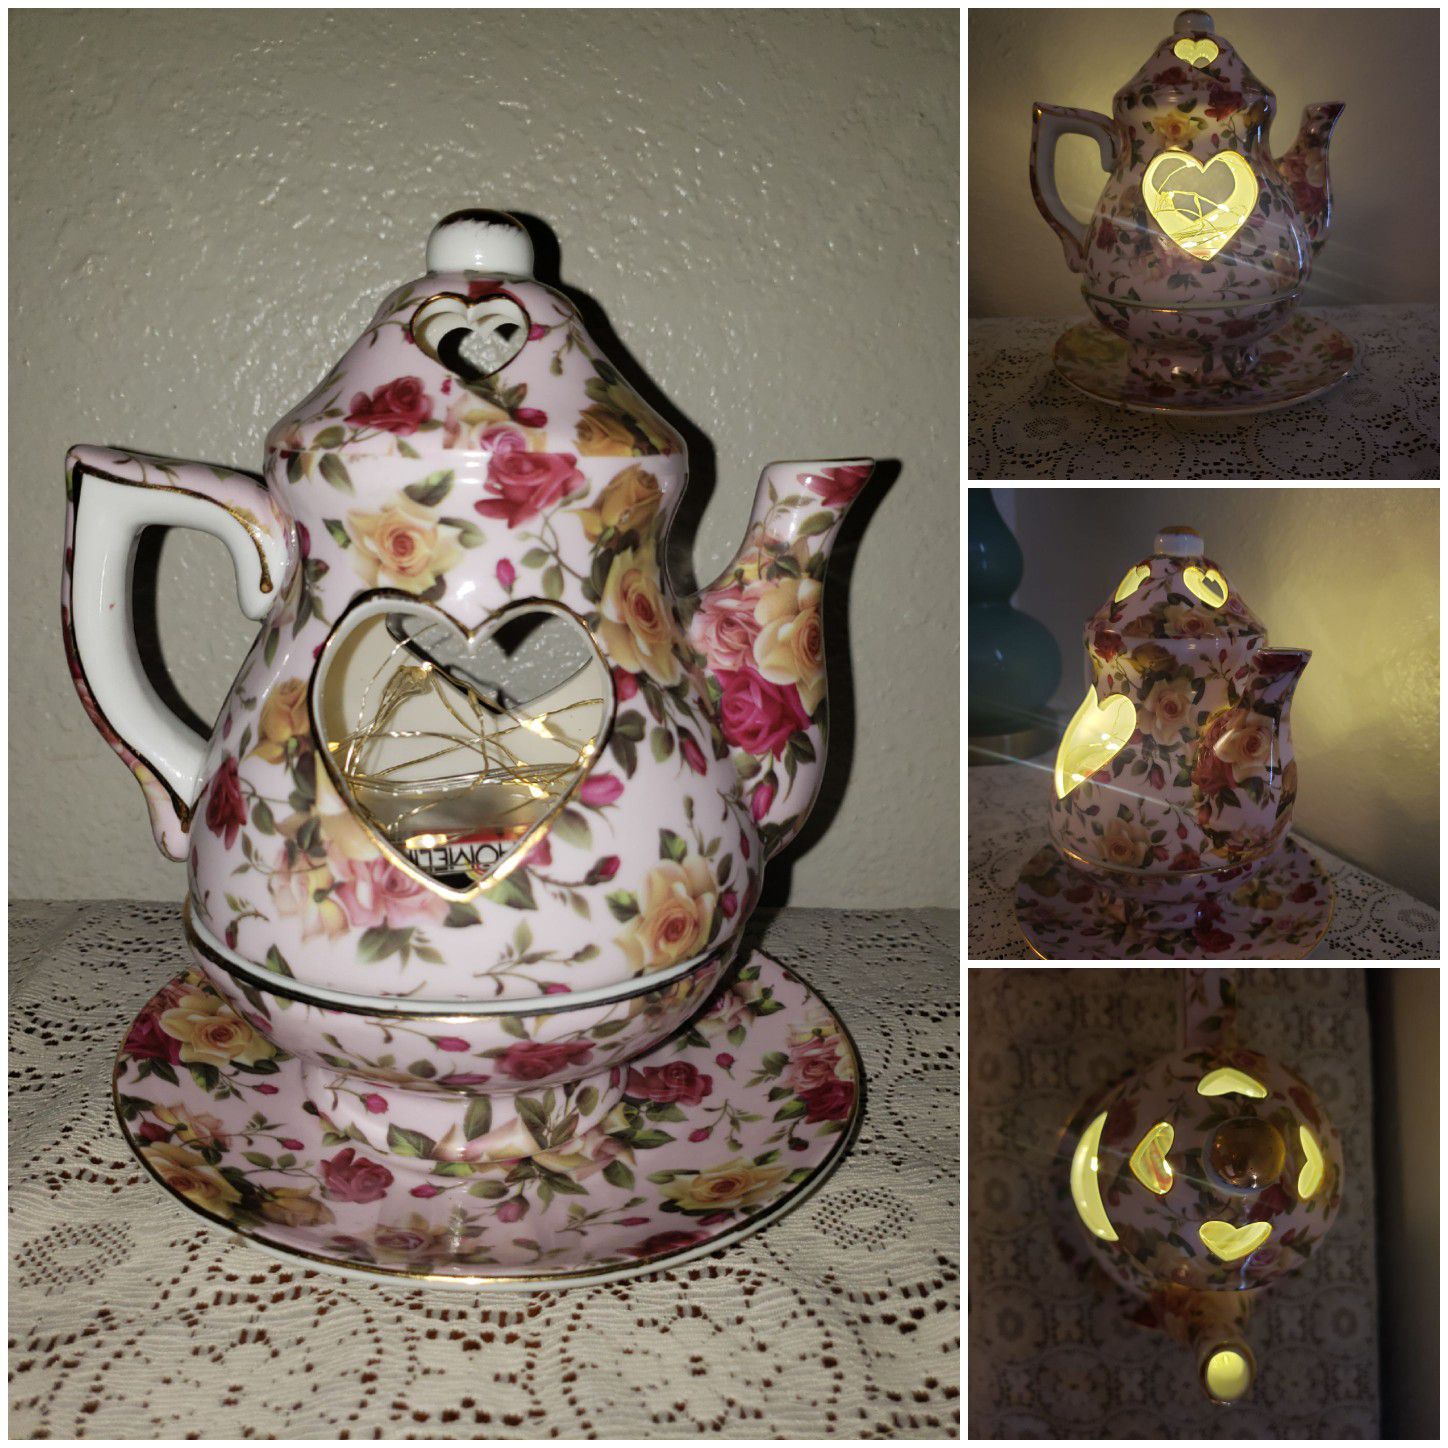 Cottage/shabby chic teapot candle holder